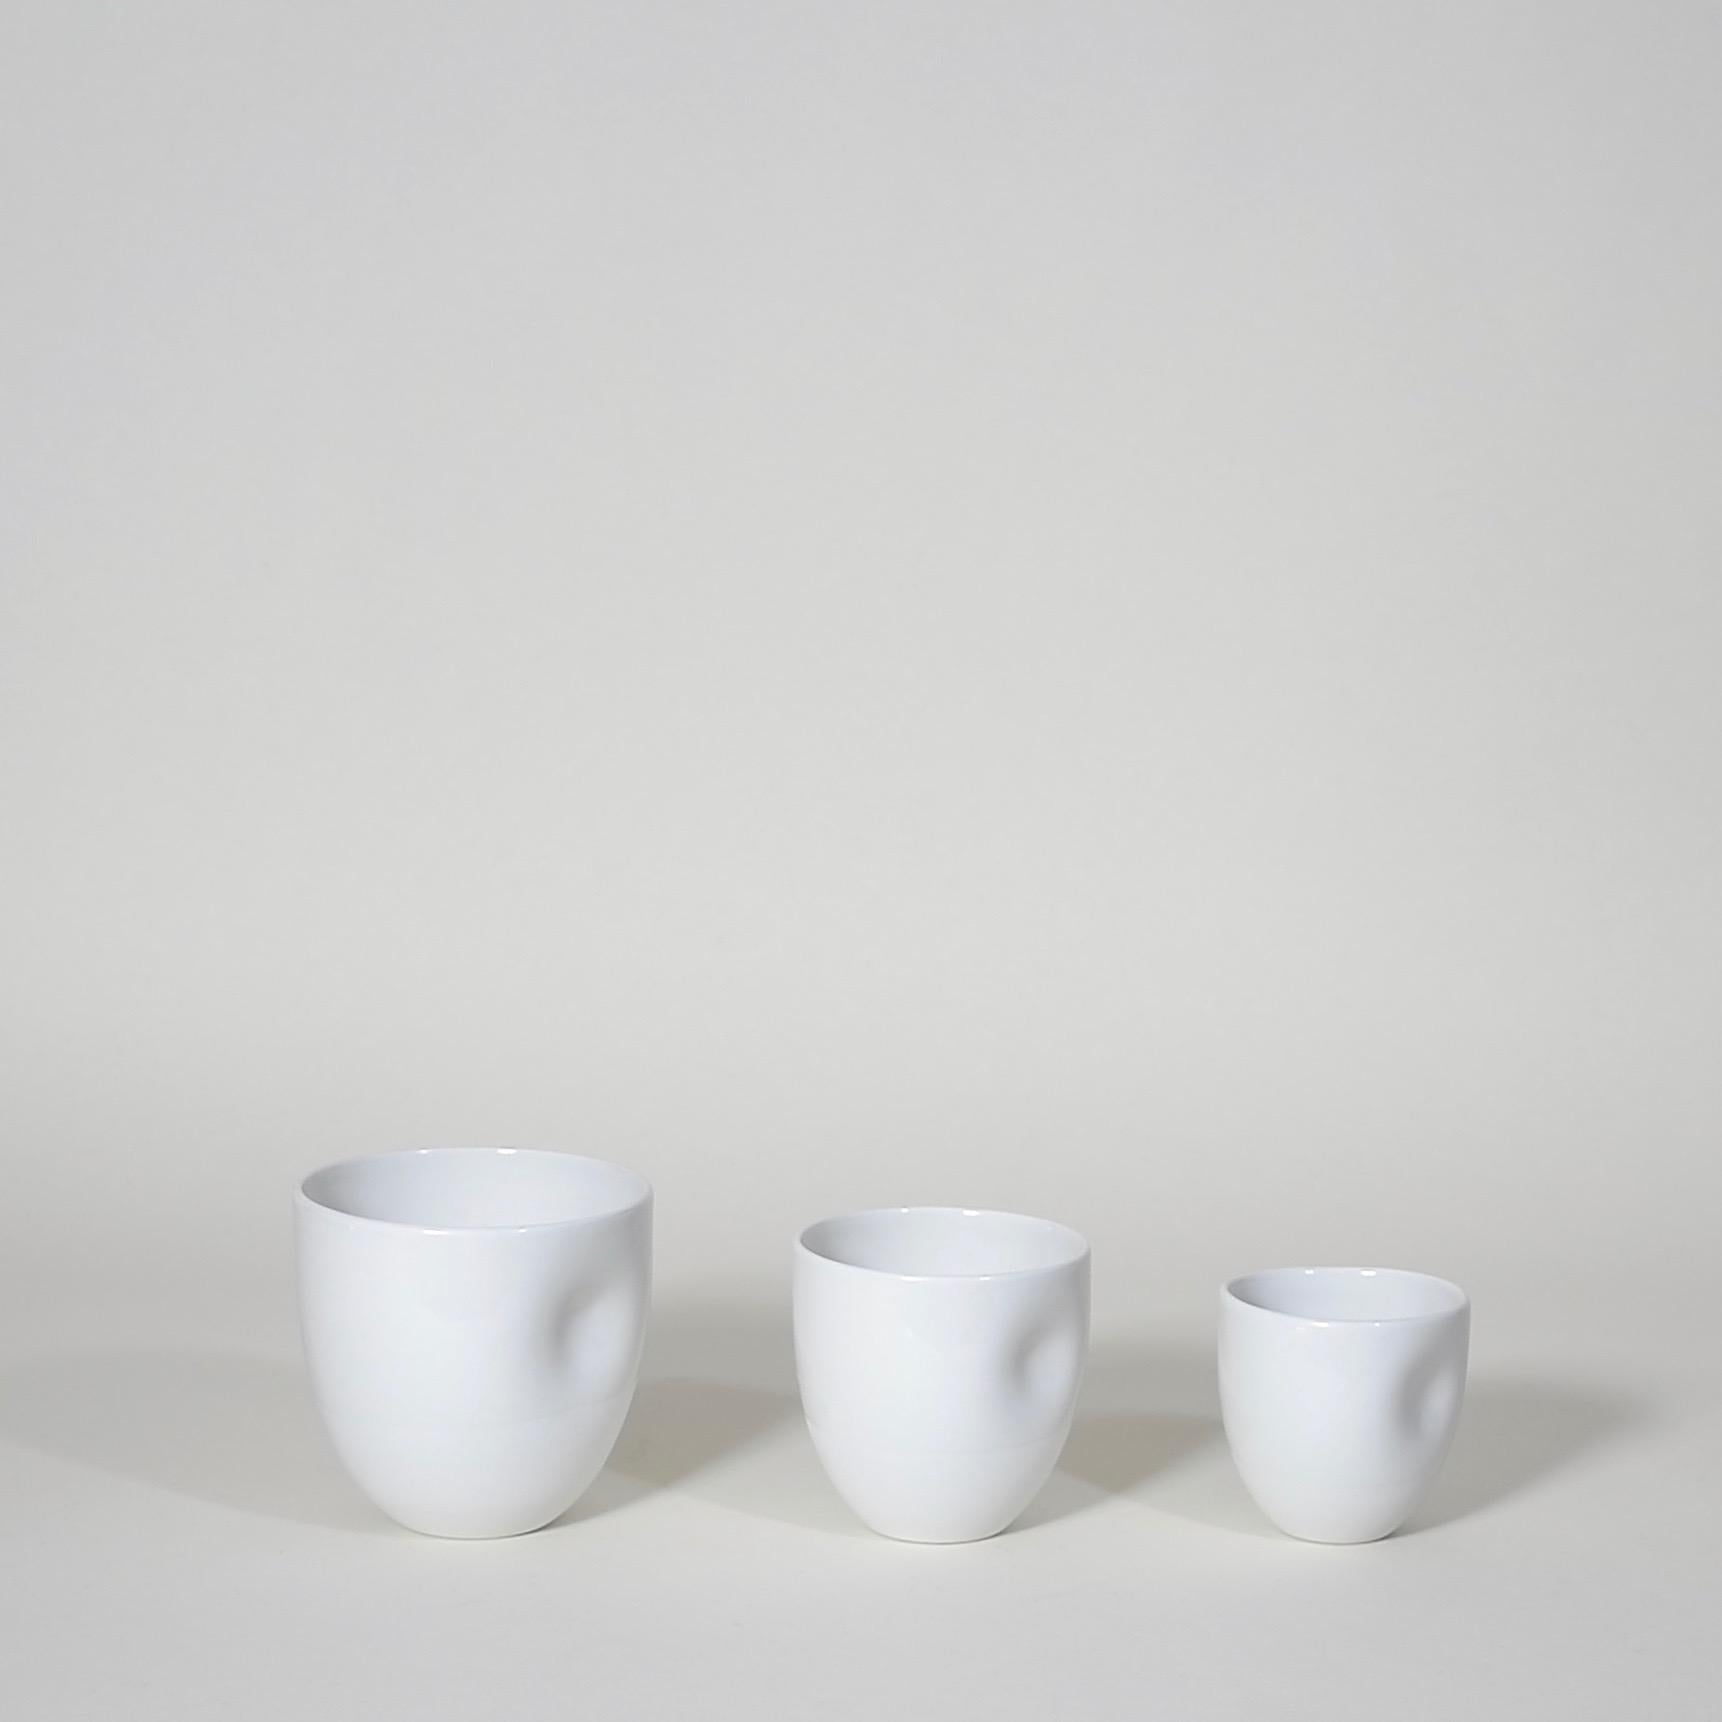 Middle Kingdom dimpled porcelain cups are designed by Carola Zee of Rotterdam, Holland. Each cup is molded and then dimpled by the hand of the potter to create a unique and comfortable hold. There are three sizes available, three colors, and